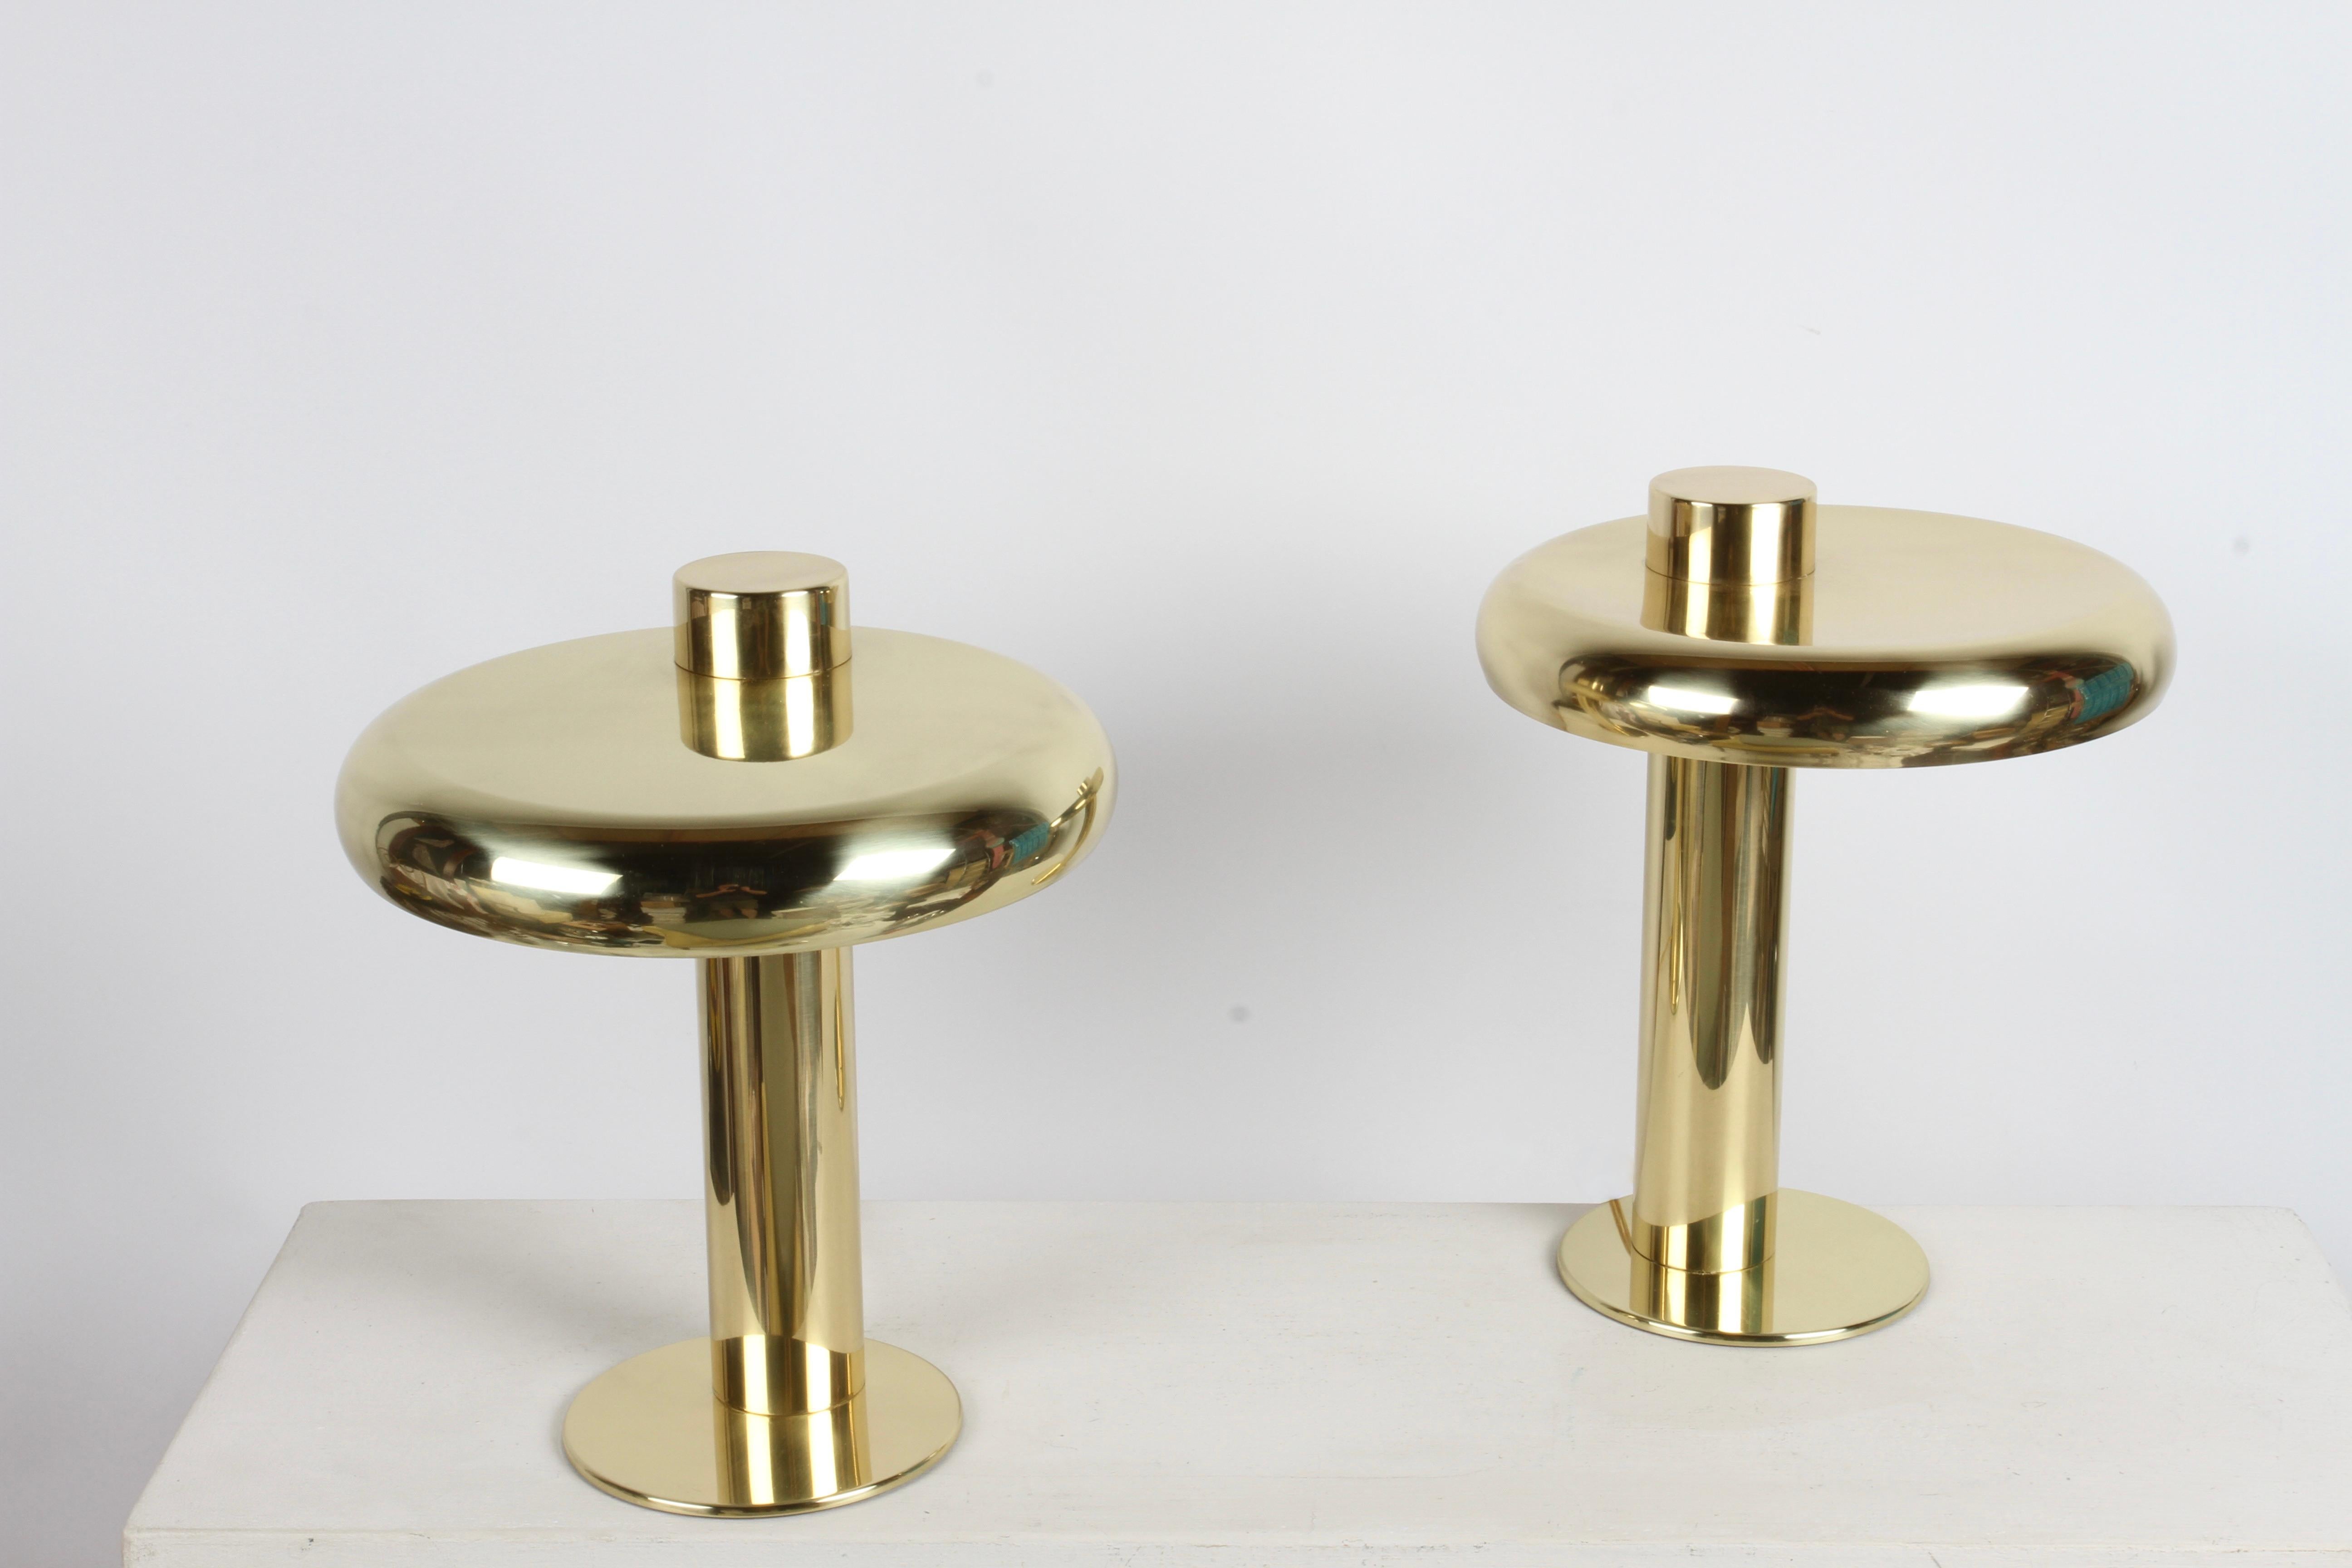 American RARE Pair of Koch & Lowy 1970s Brass Saucer Form Table lamps - Fully restored  For Sale